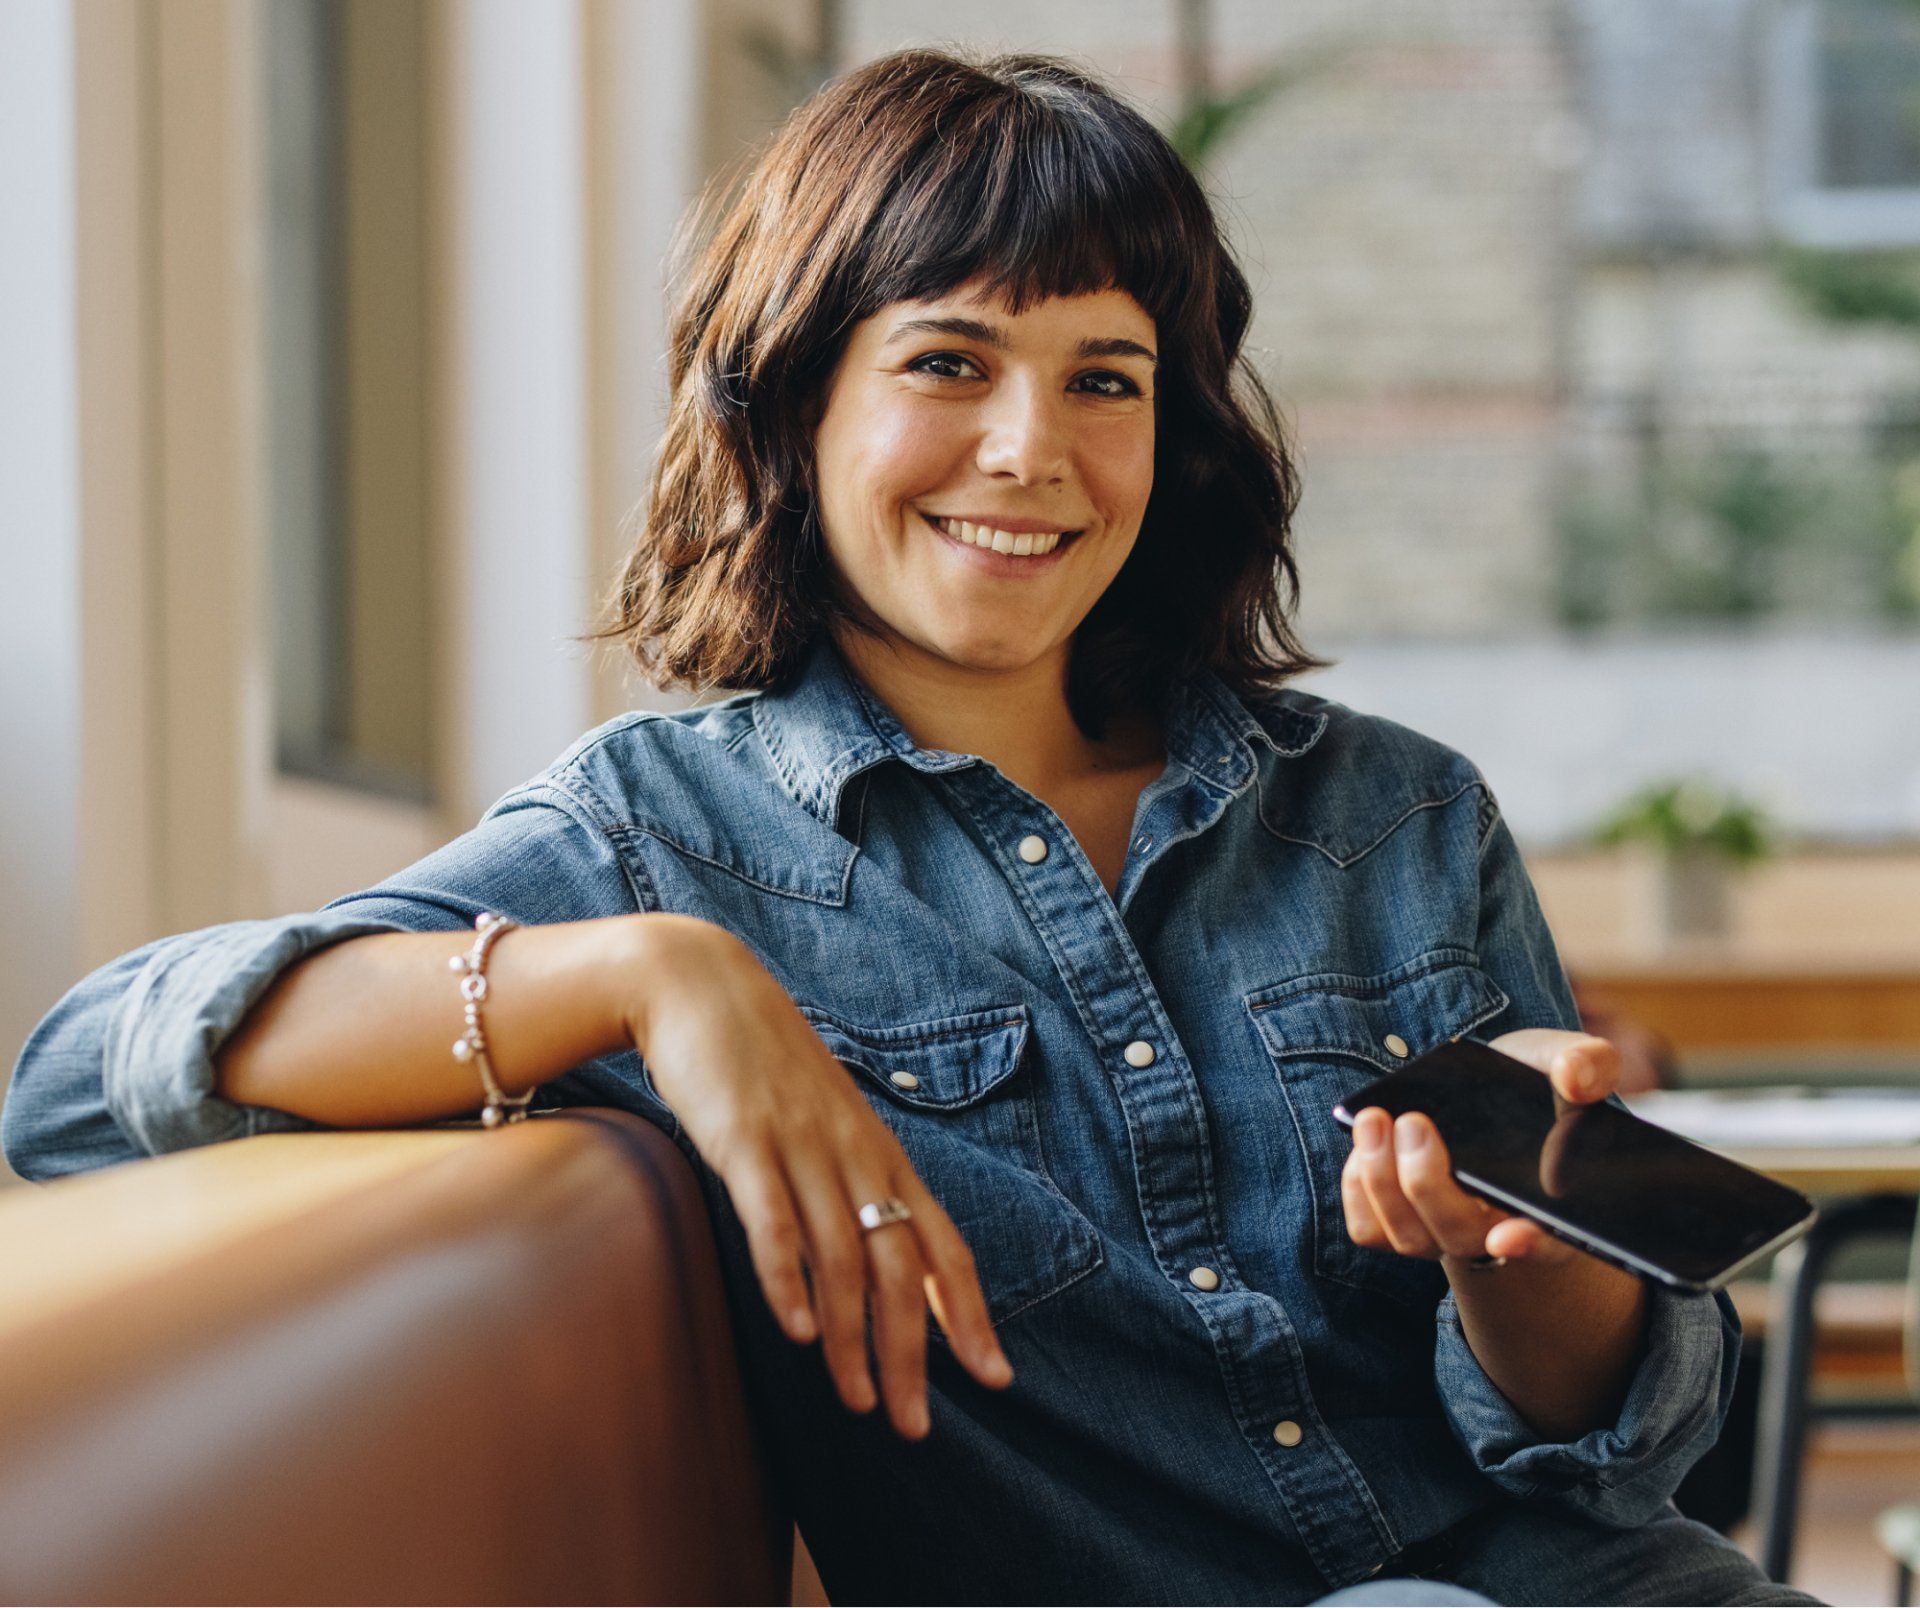 A woman is sitting on a couch holding a cell phone and smiling.